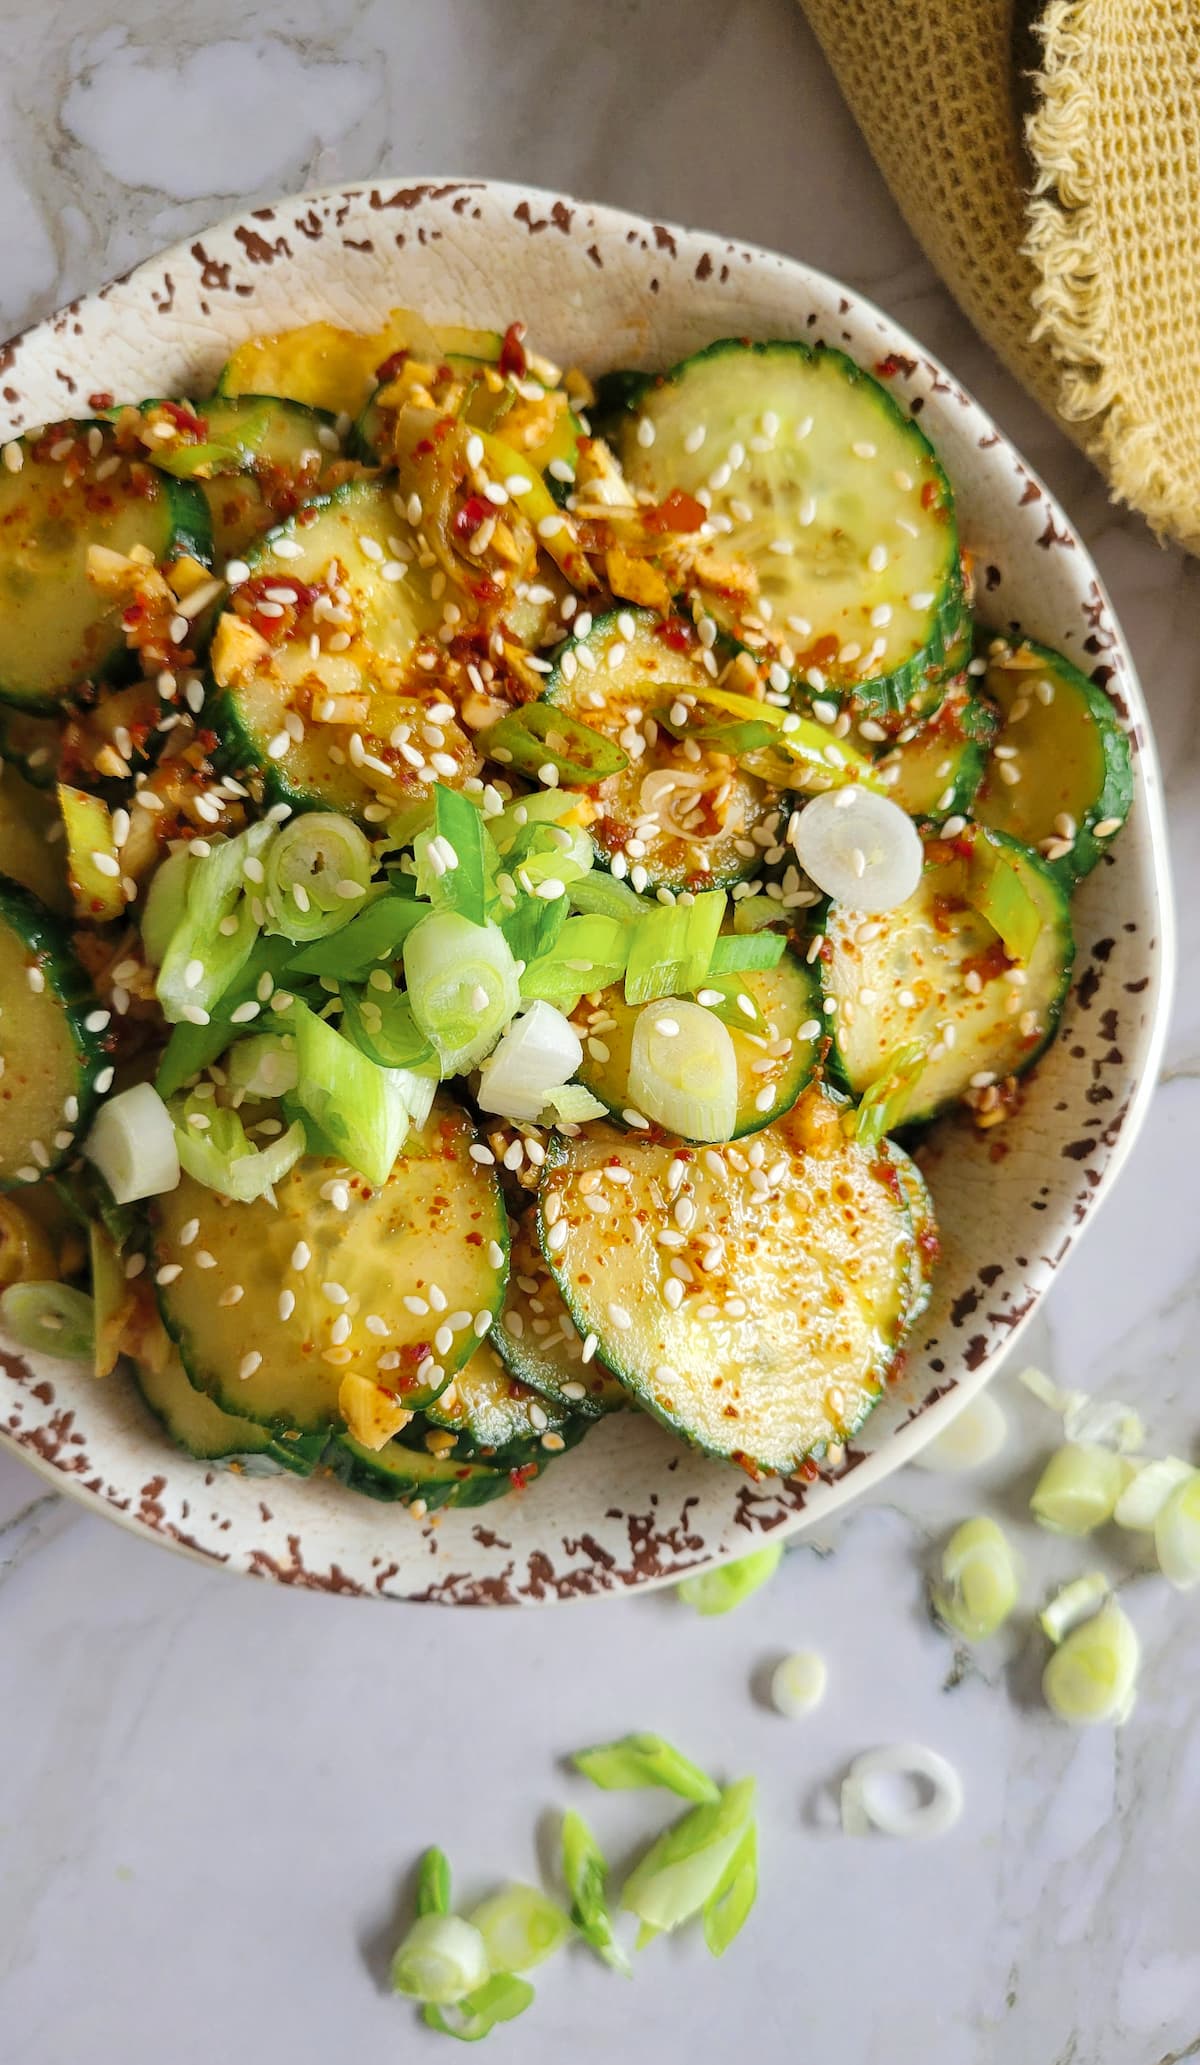 a bowl of cucumbers in a spicy sauce with sesame seeds and green onions